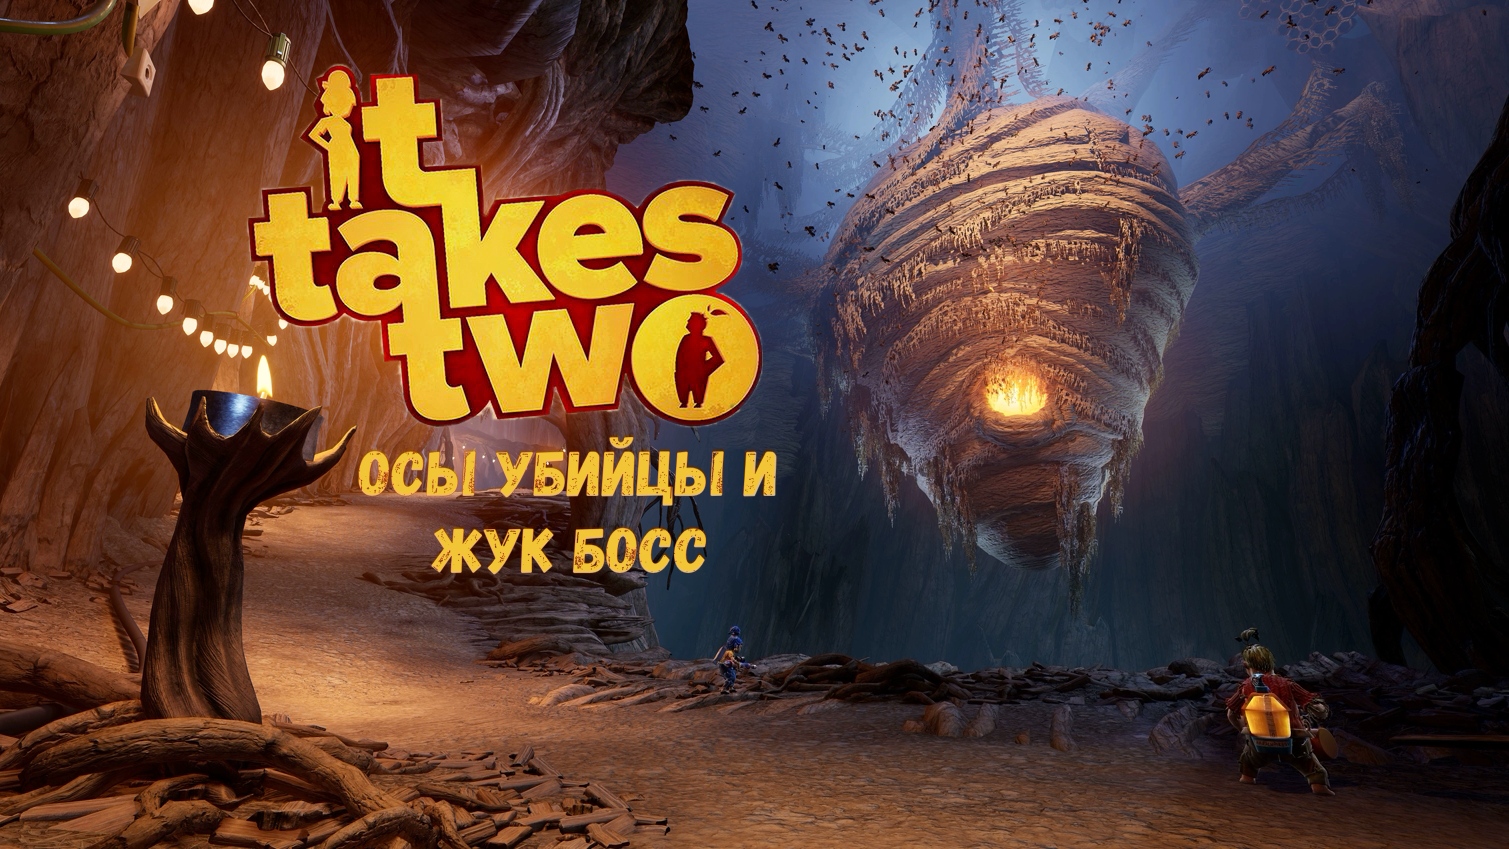 Игры сколько боссов. It takes two Королева ОС. Игра it takes two боссы. Босс Жук. Гигантский Жук it takes two.